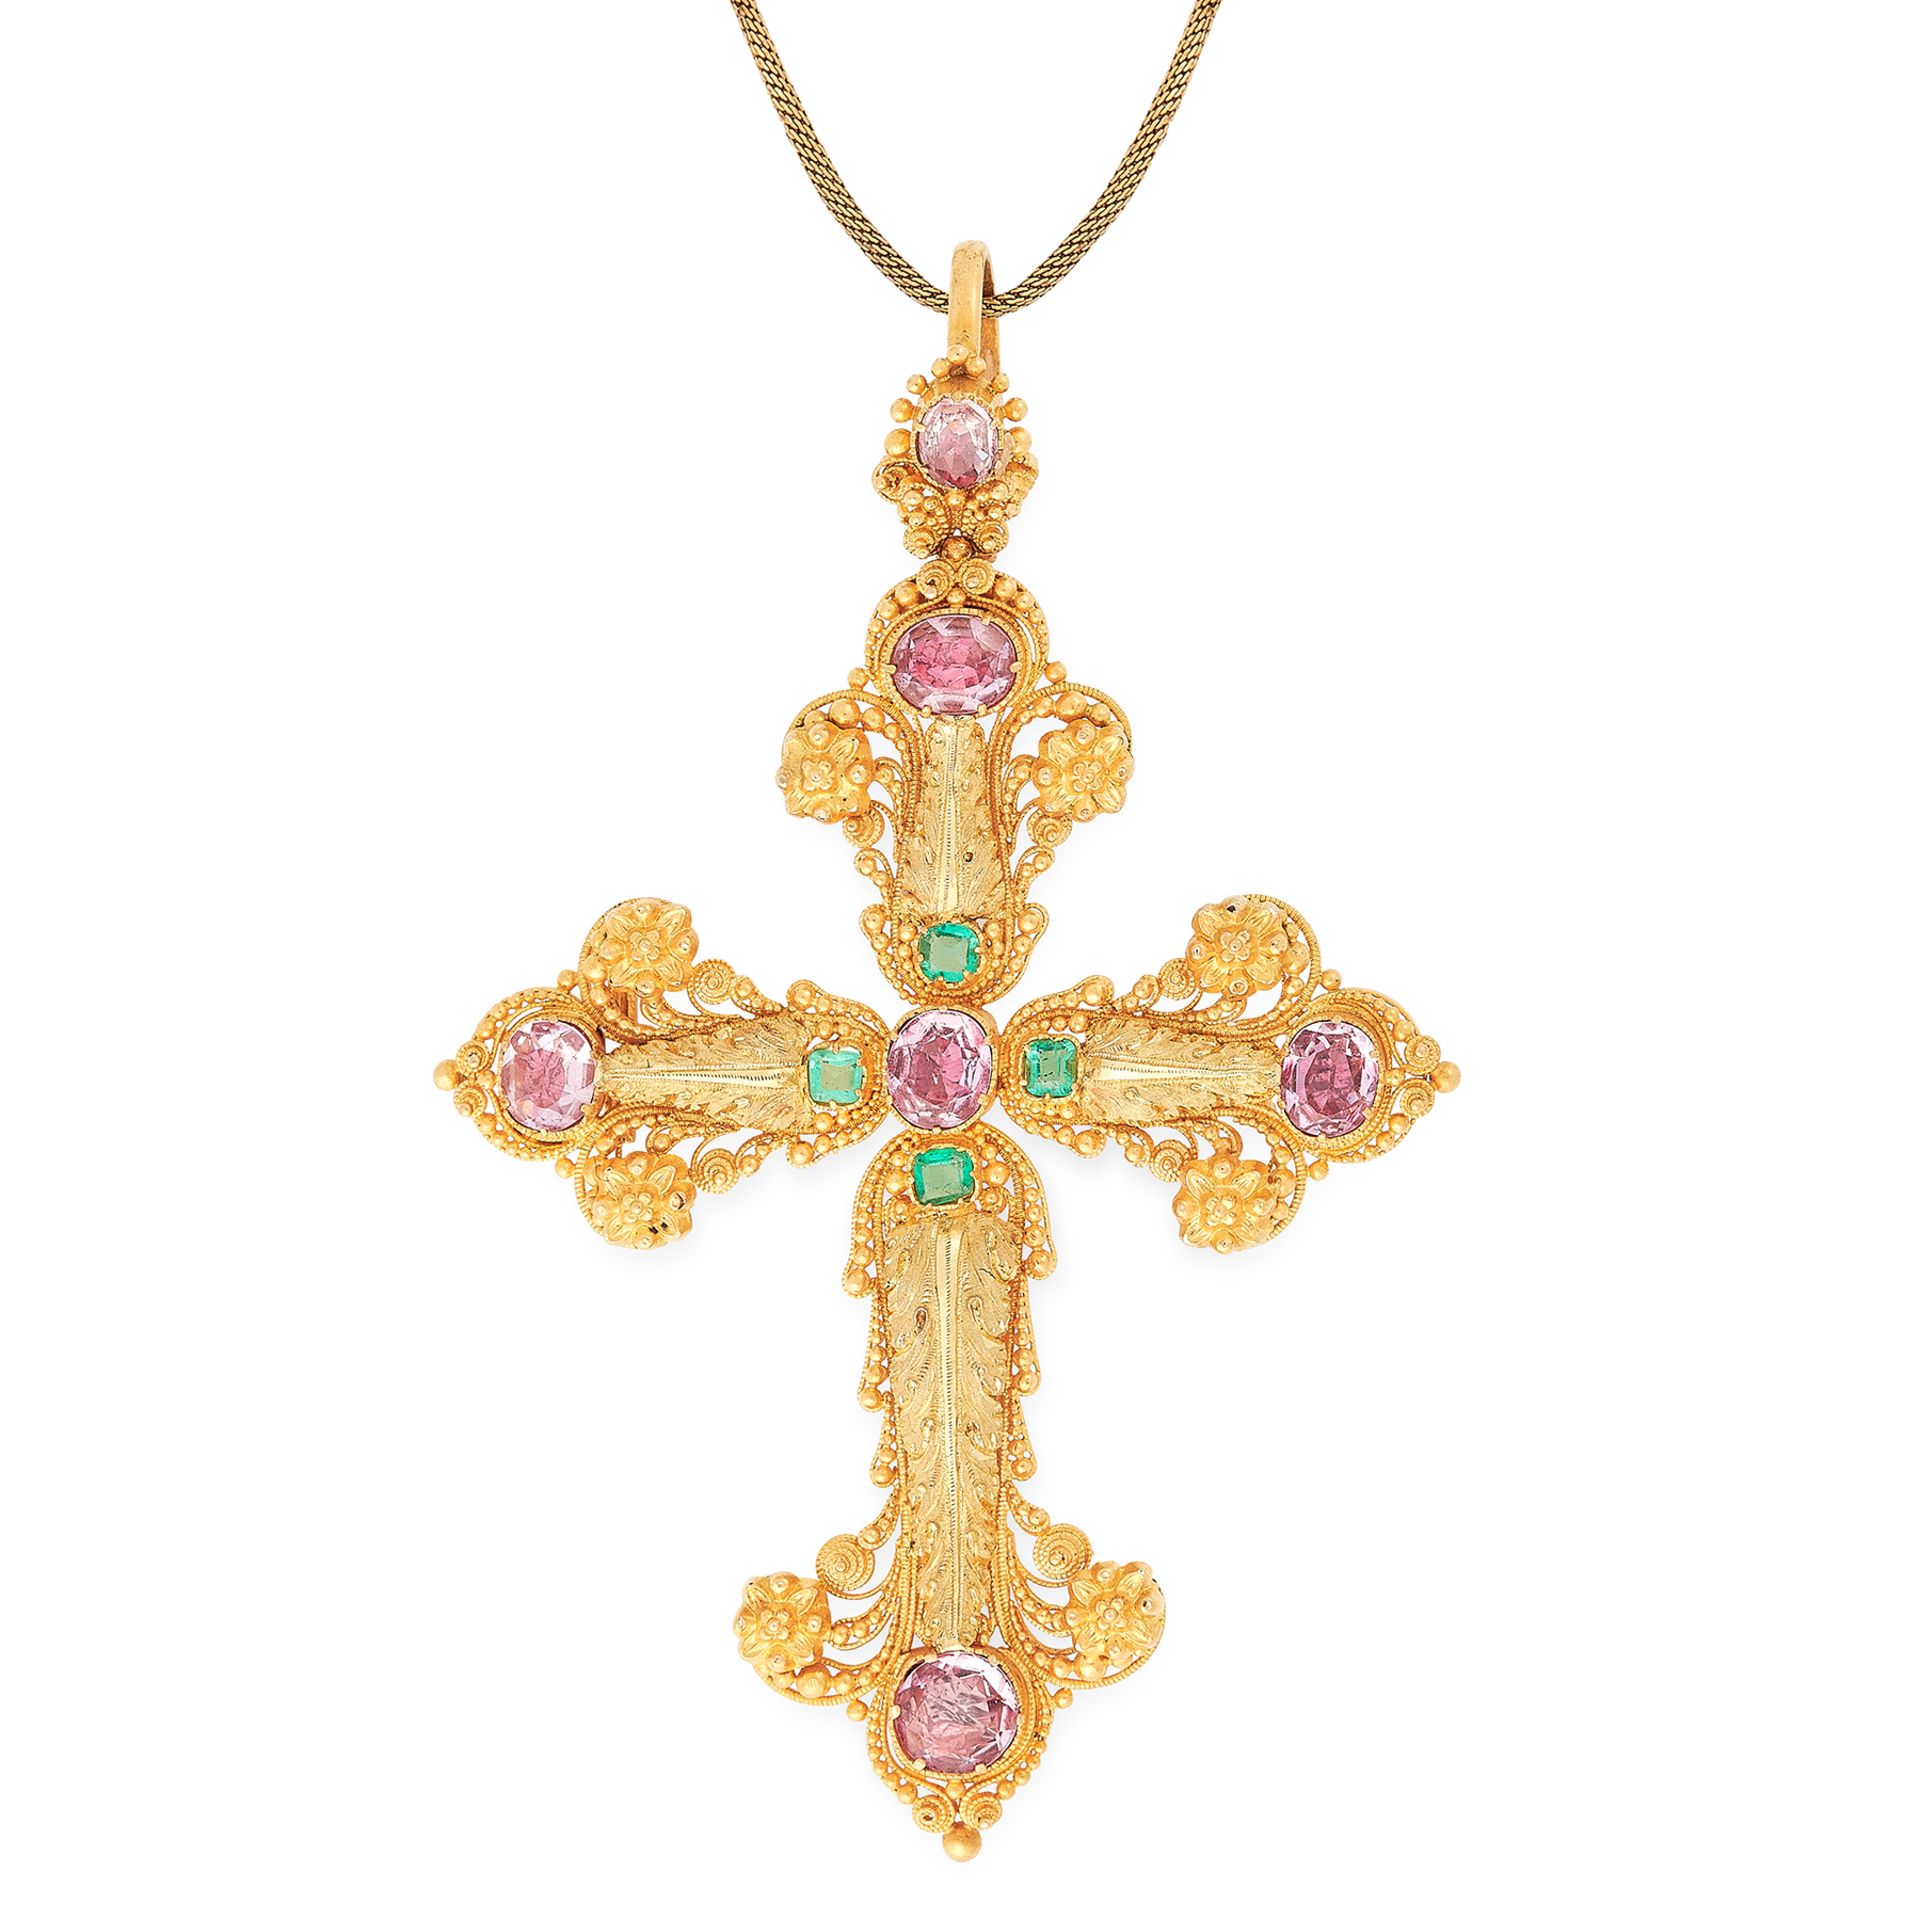 AN ANTIQUE GEORGIAN PINK TOPAZ AND EMERALD CROSS PENDANT in high carat yellow gold, designed as a